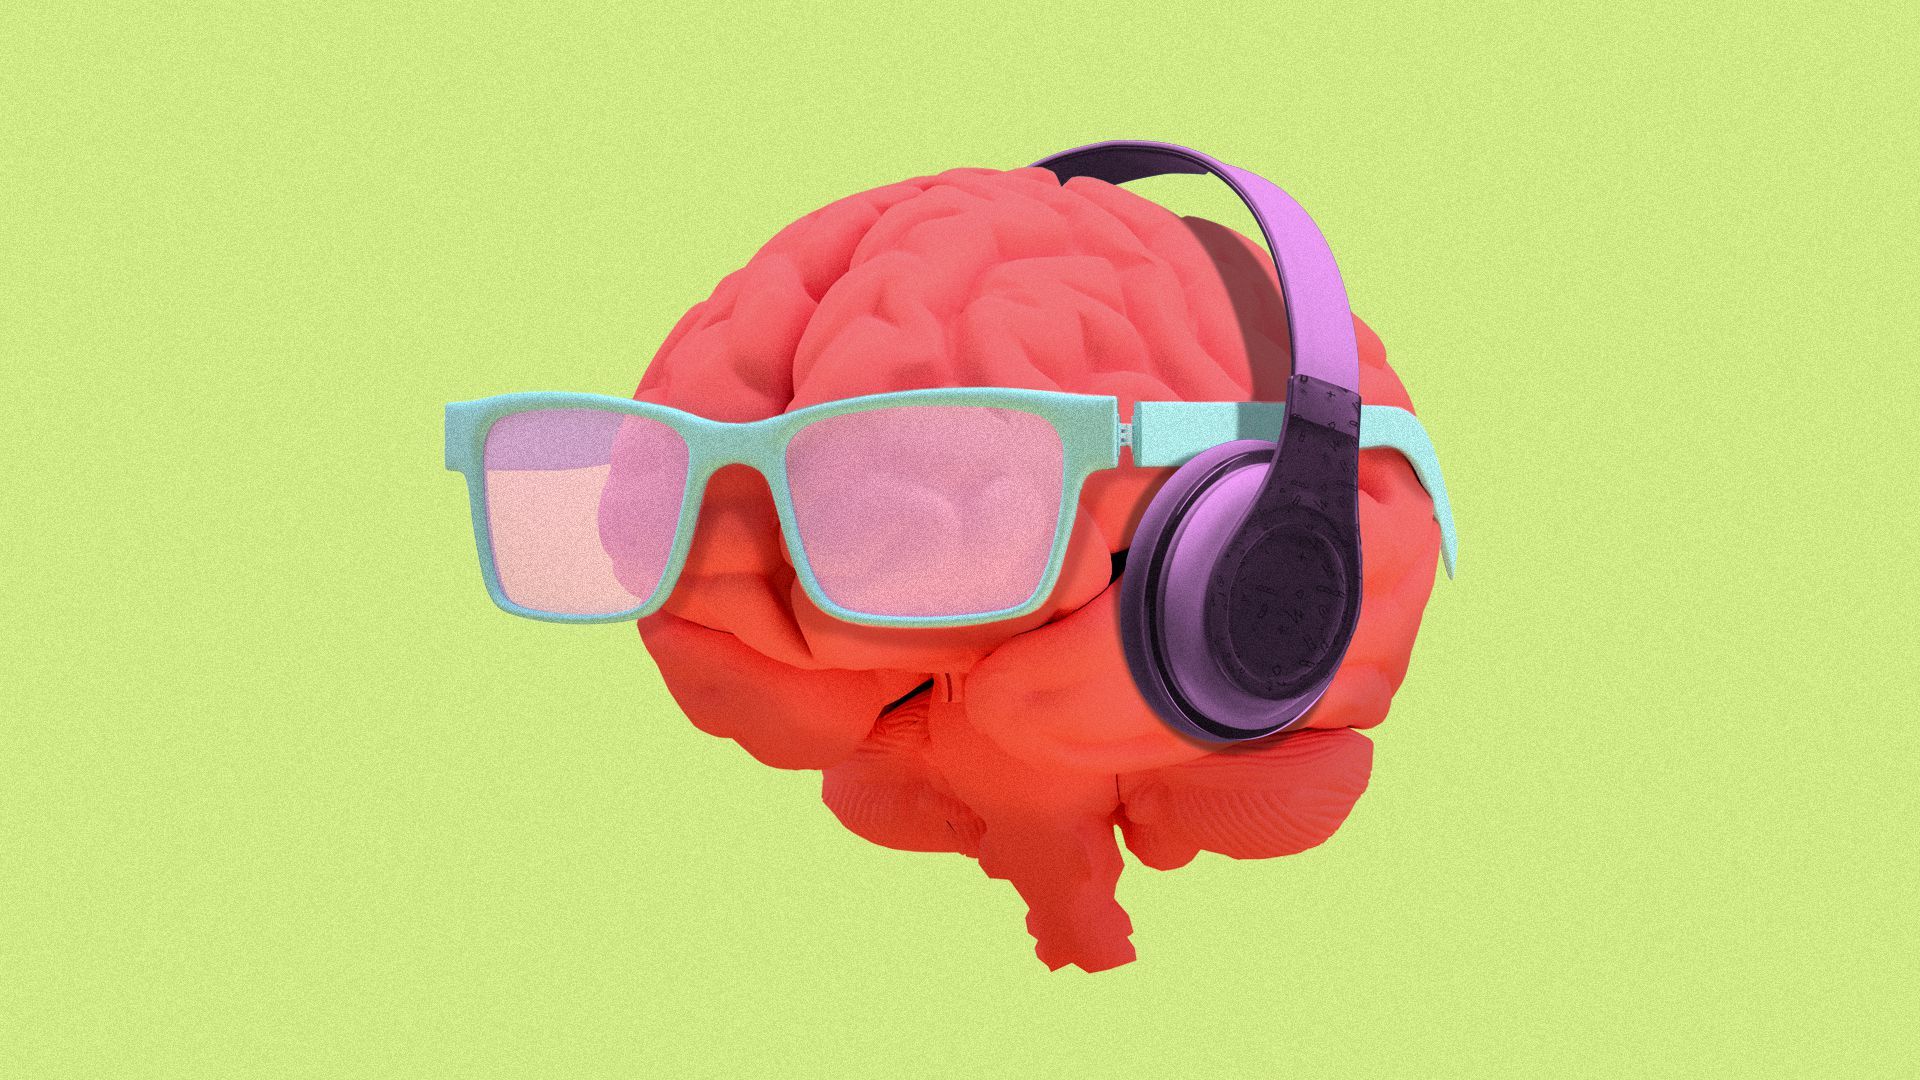 Illustration of a brain with sunglasses and headphones 